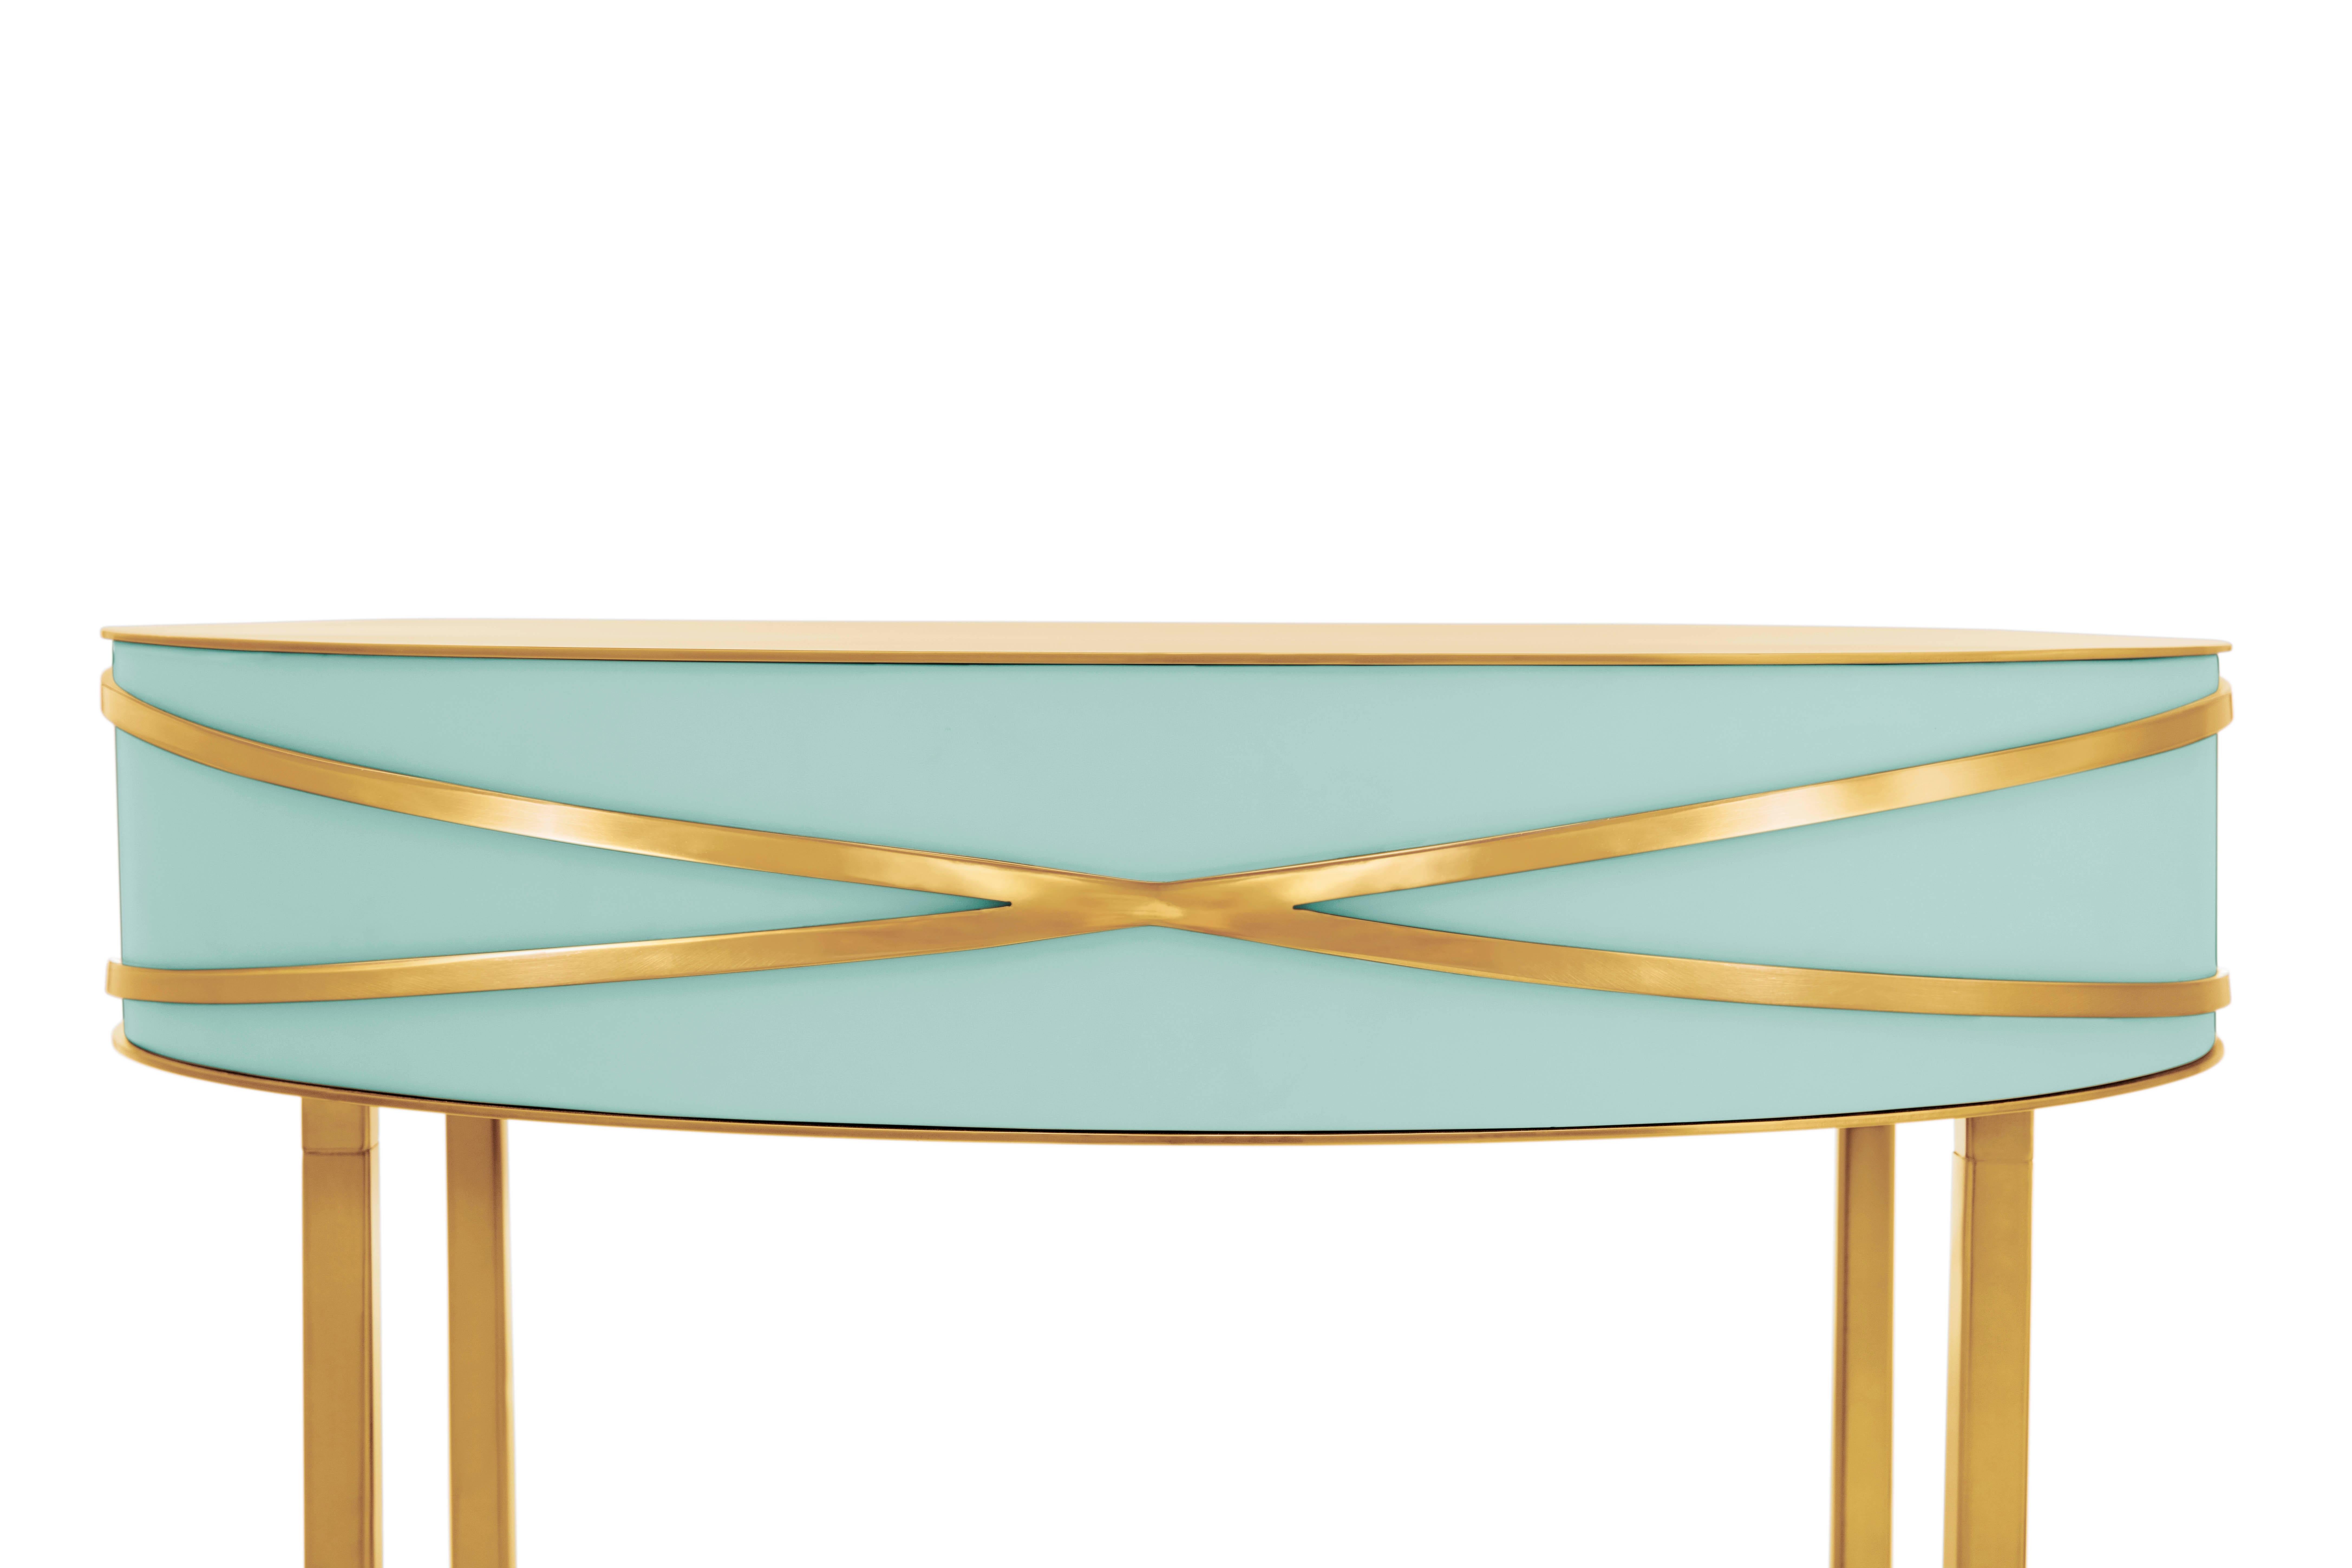 Stella Mint Green Console or Bedside Table with Gold Trims by Nika Zupanc is a mint green console table with a drawer, and metal trims in gold.

Nika Zupanc, a strikingly renowned Slovenian designer, never shies away from redefining the status quo